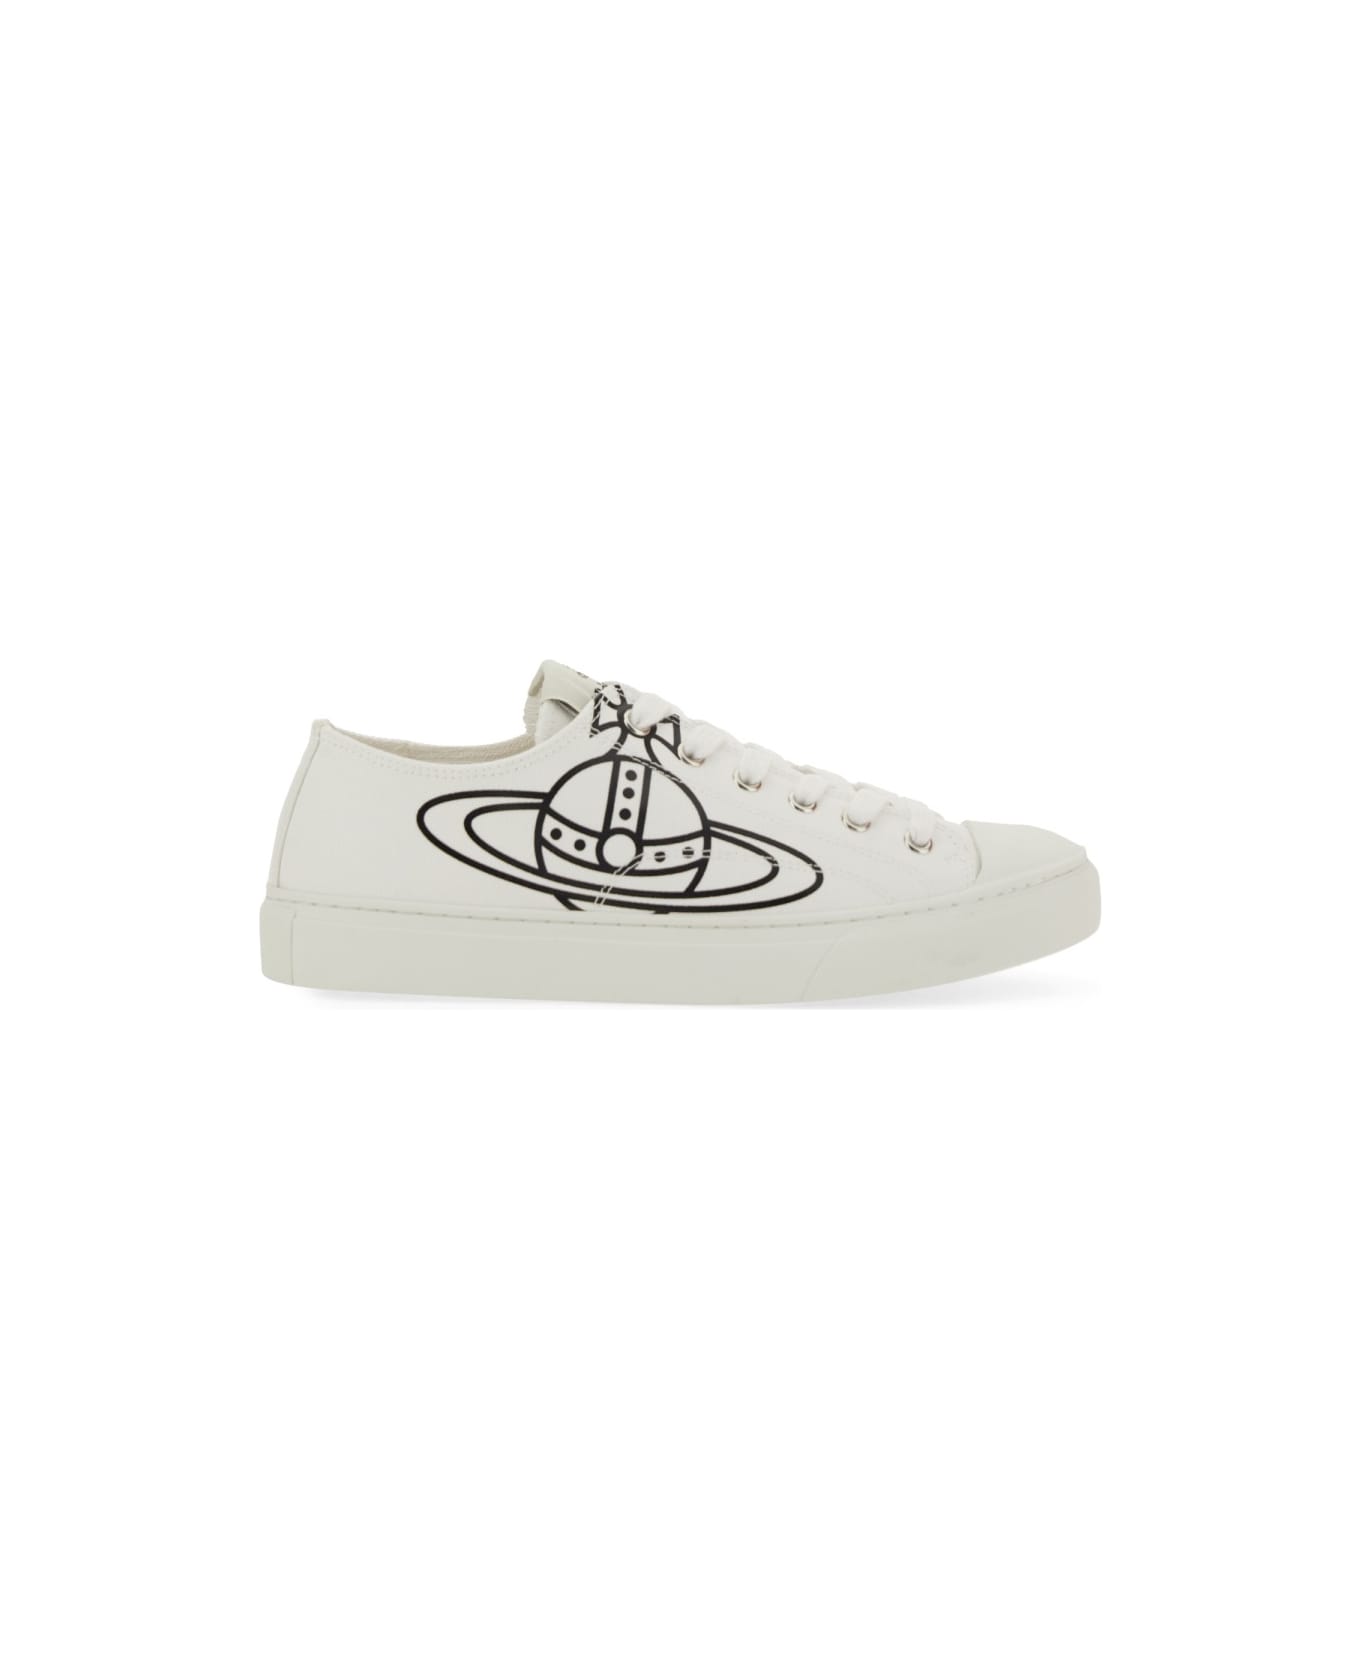 Vivienne Westwood Low Sneaker With Orb Logo - WHITE スニーカー